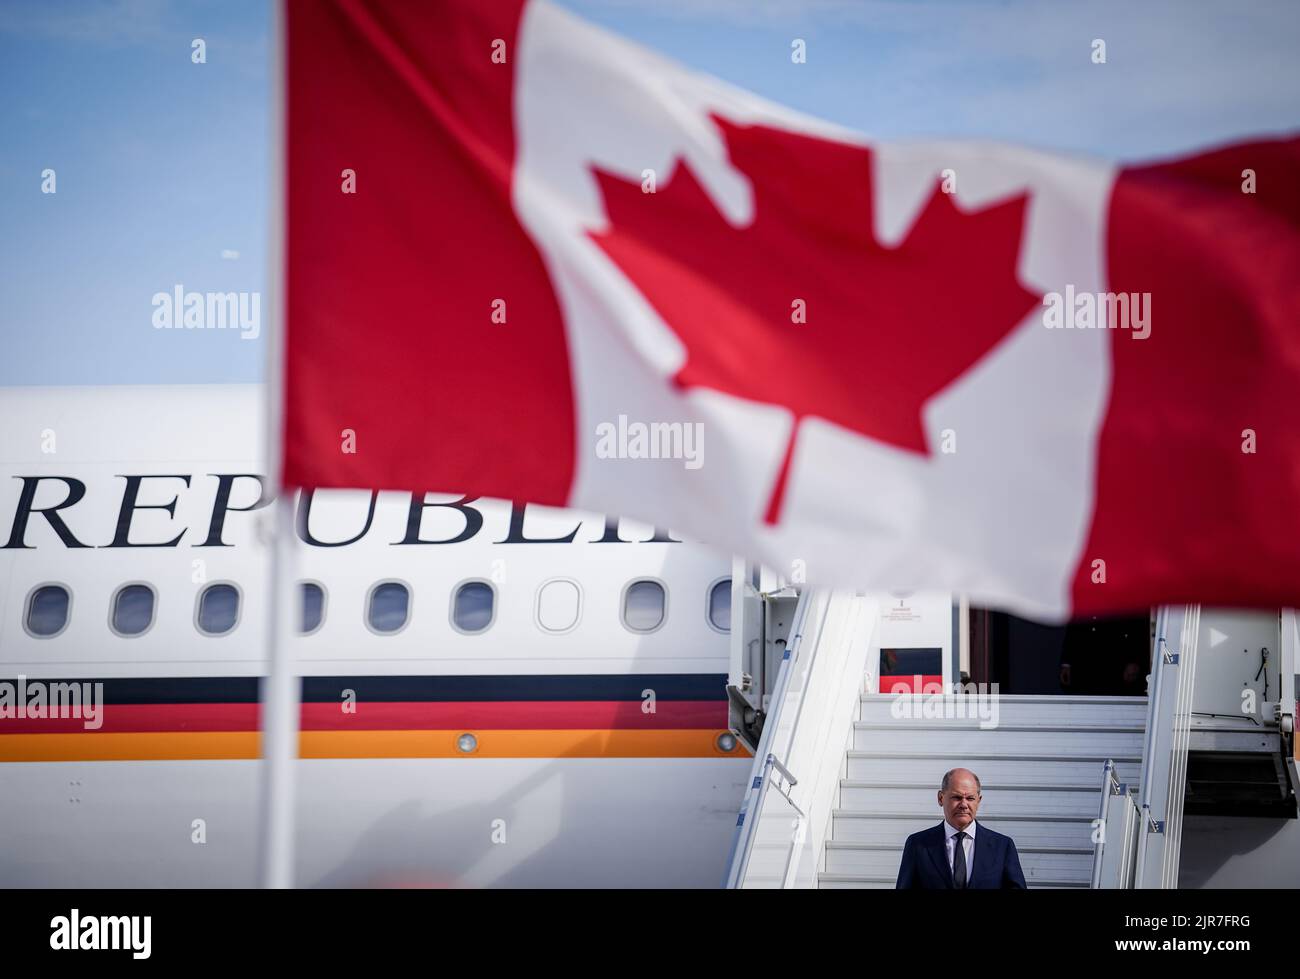 Toronto, Canada. 22nd Aug, 2022. German Chancellor Olaf Scholz (SPD) arrives at Toronto Airport on an Air Force Airbus A340 behind Canada's flag. The trip will focus on cooperation between the two countries in the climate and energy sectors. Credit: Kay Nietfeld/dpa/Alamy Live News Stock Photo